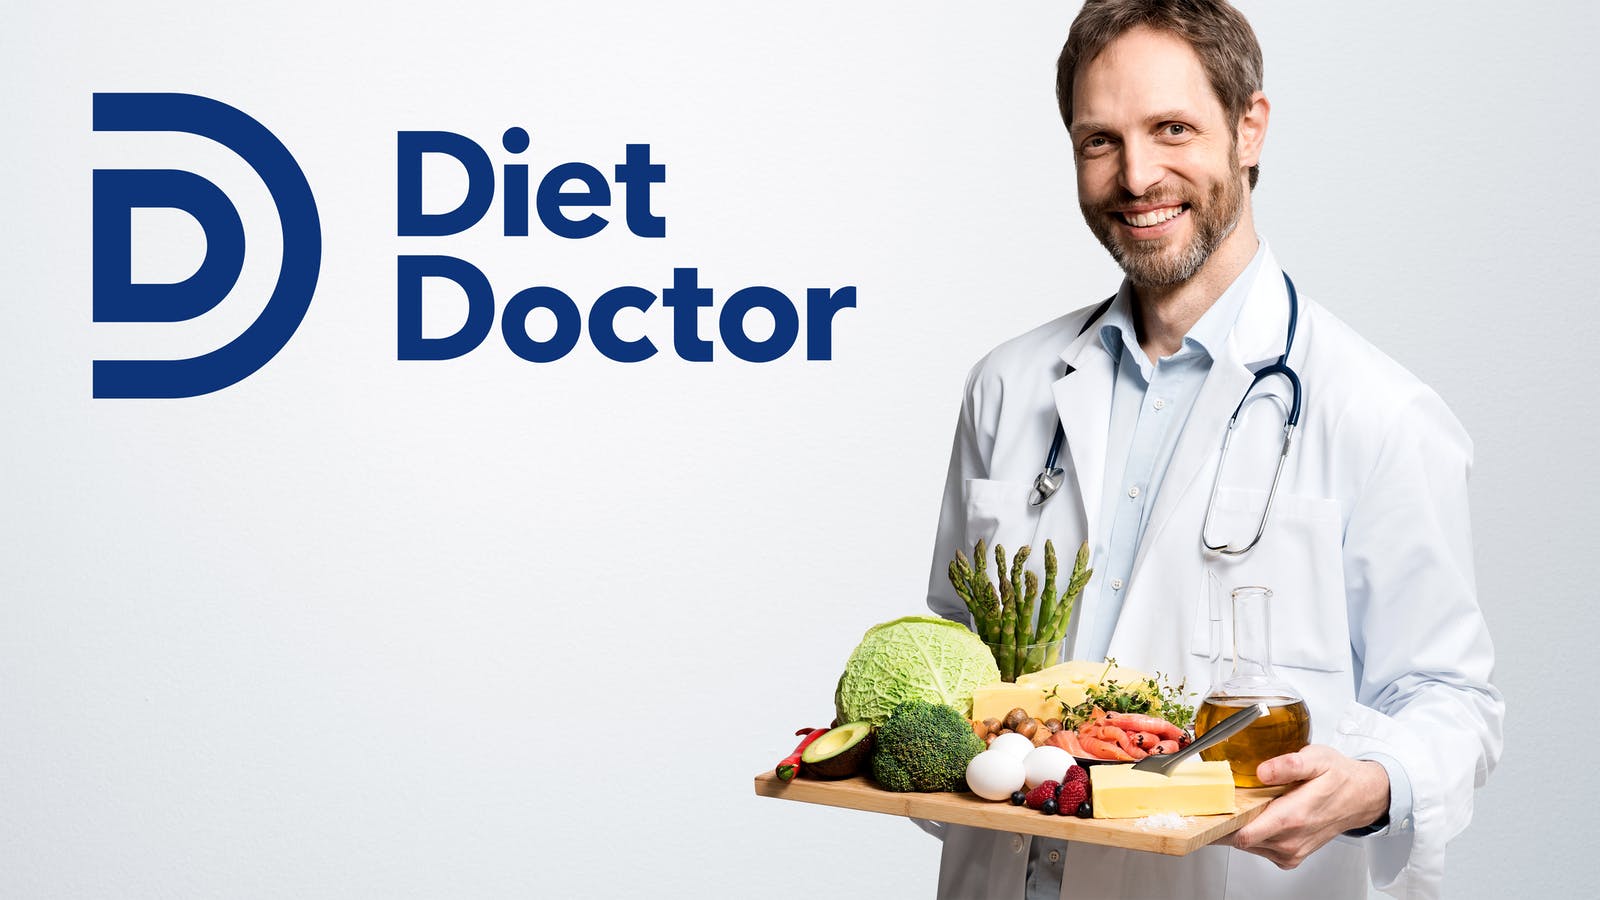 Diet doctor free online course with credit for medical